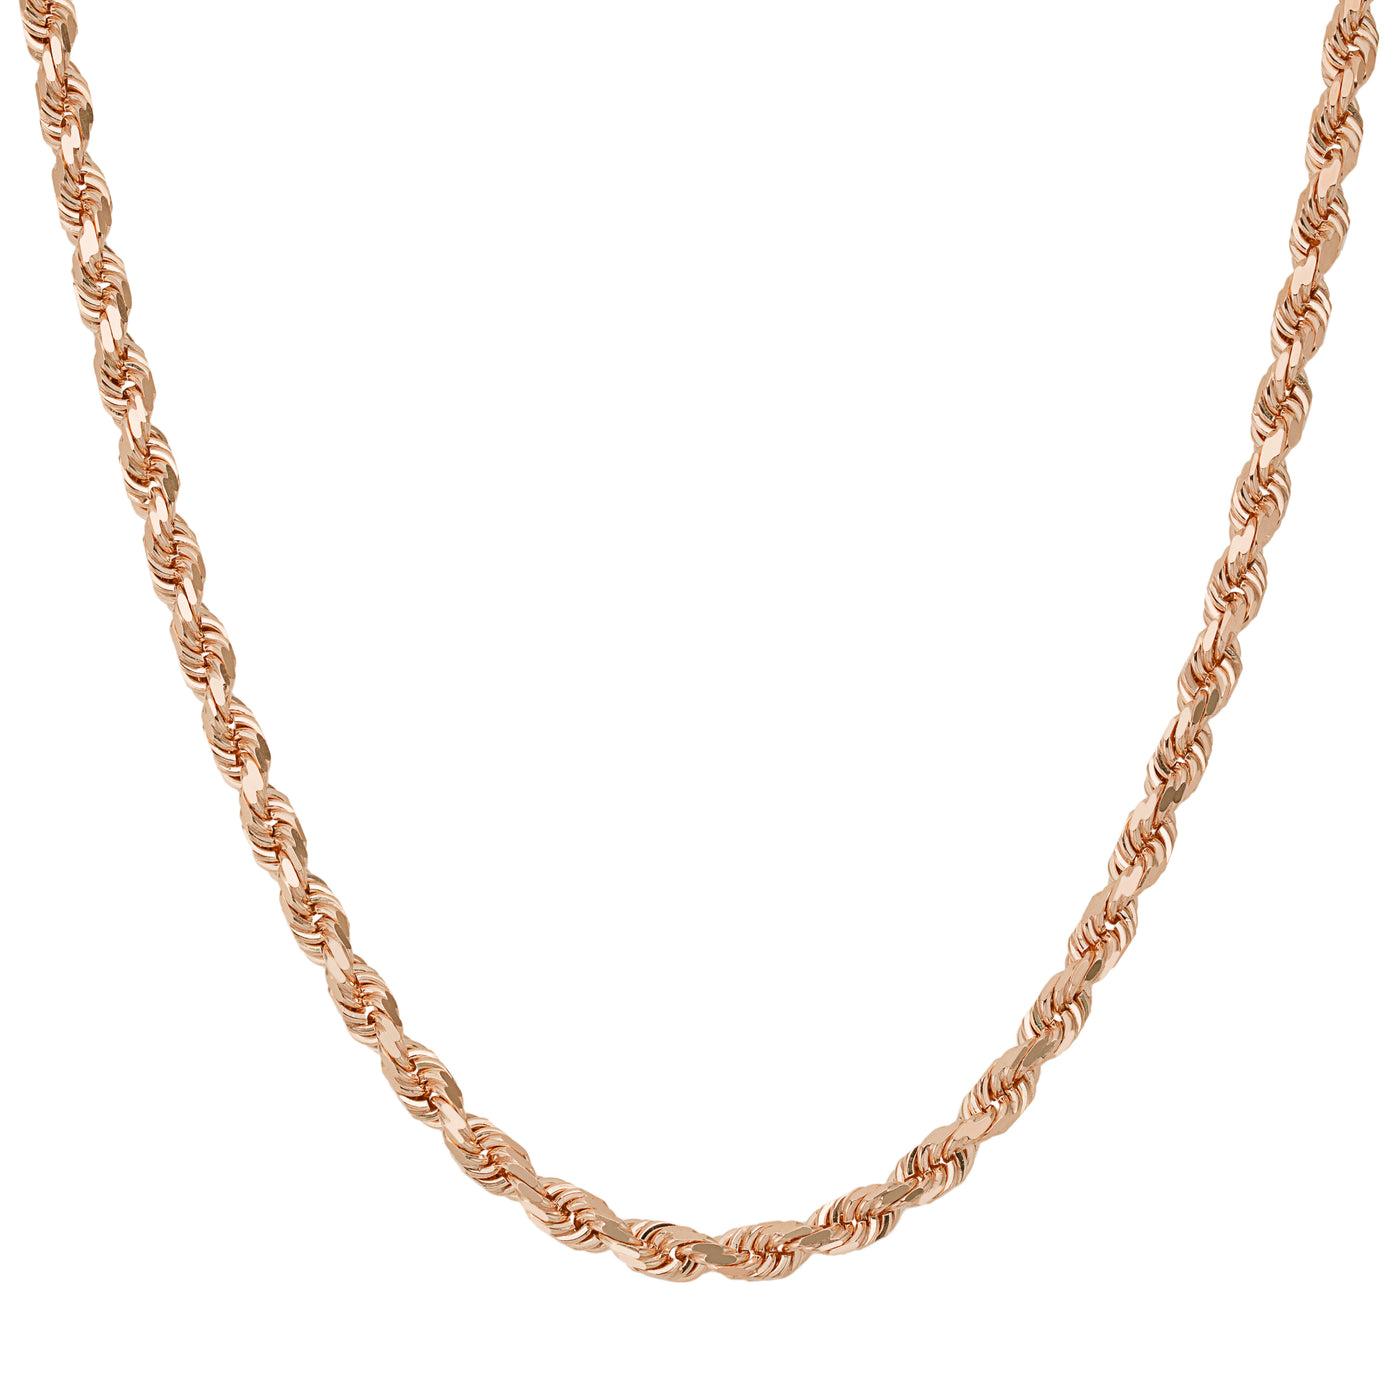 Women's Rope Chain Necklace 10K Rose Gold - Solid